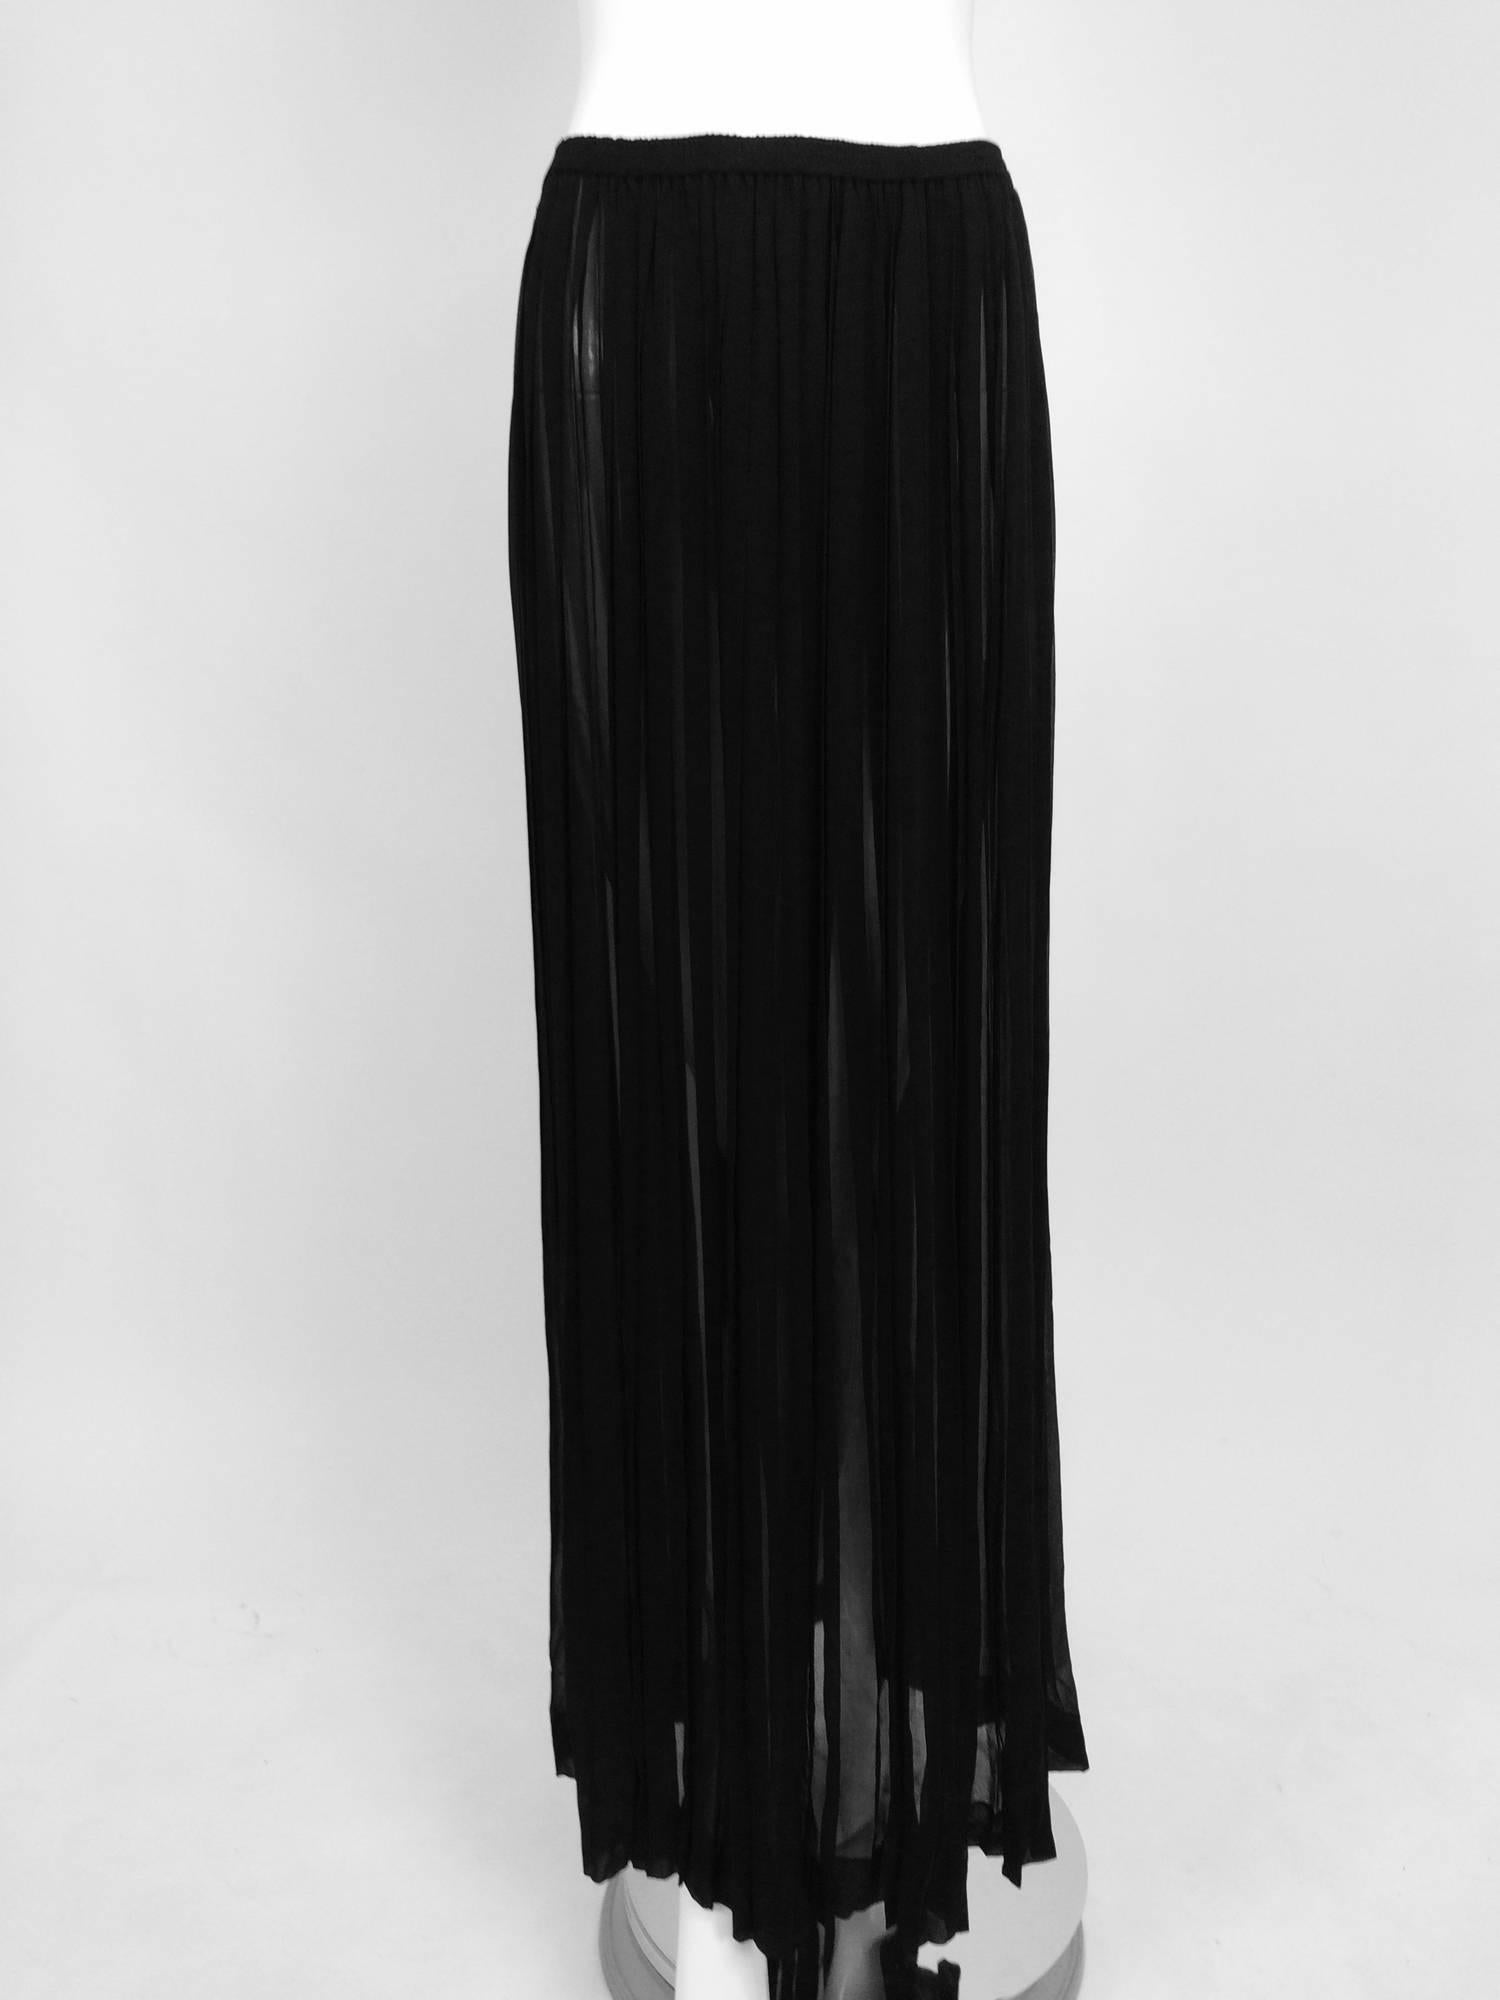 Yves Saint Laurent Black Silk Chiffon Knife Pleated Maxi Skirt Vintage 1970s In Good Condition In West Palm Beach, FL